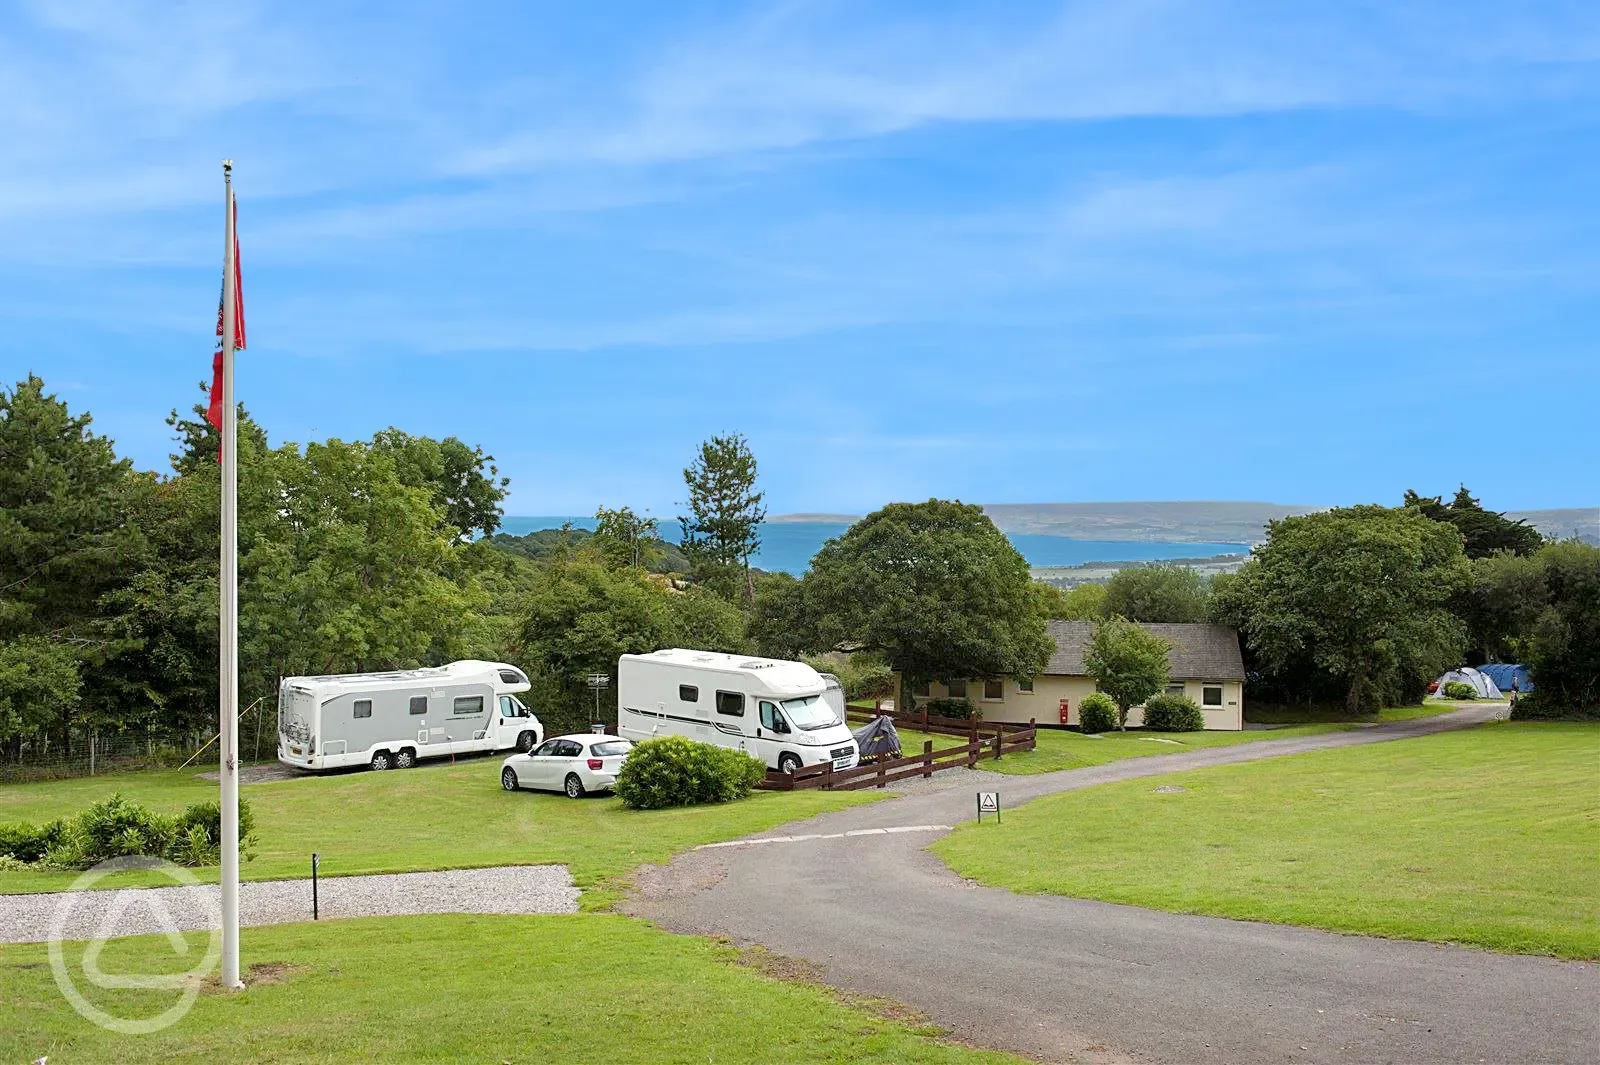 Grass pitches by the sea